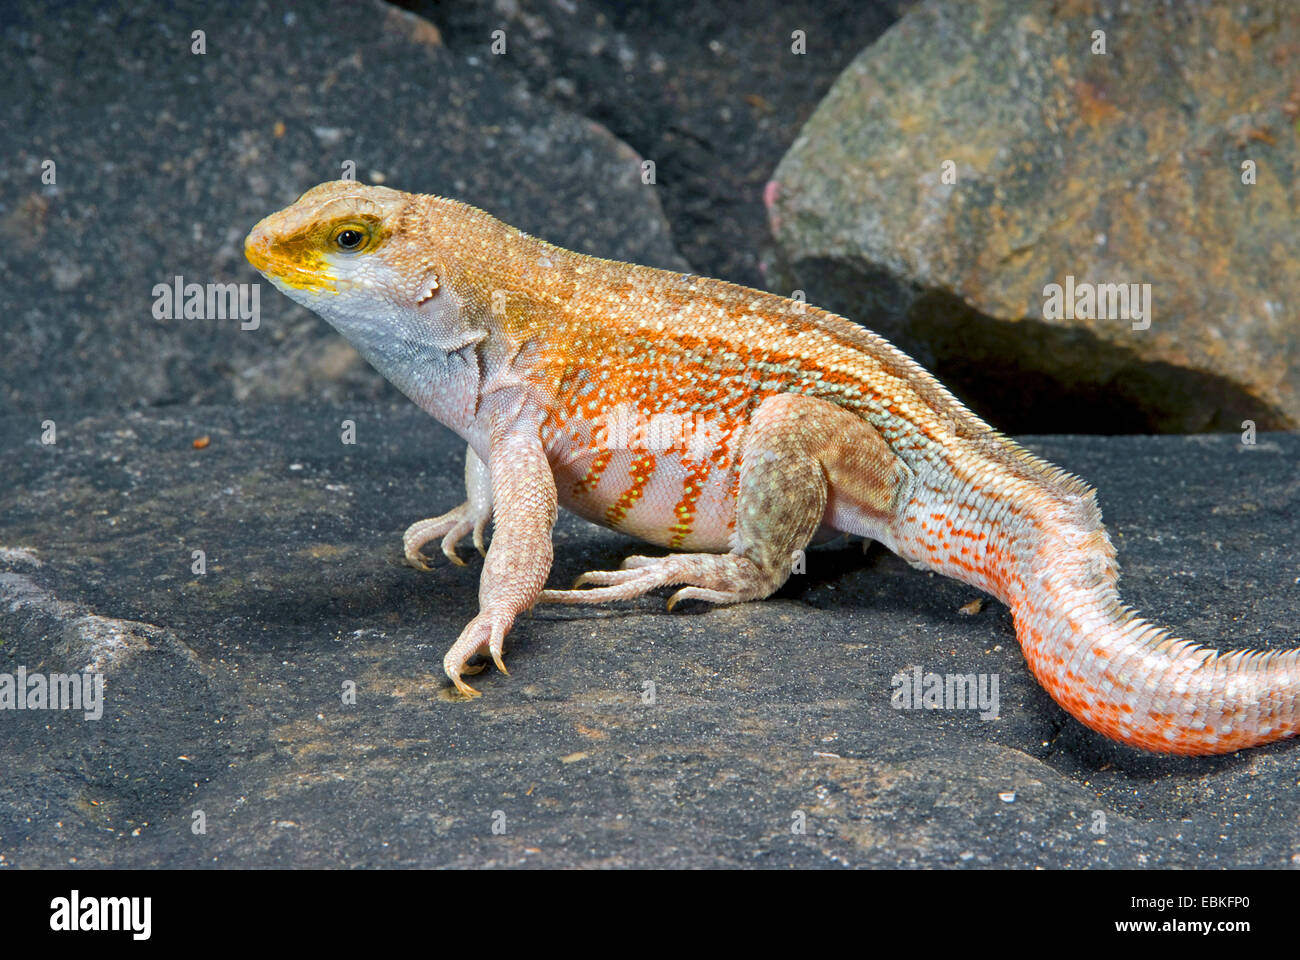 Red-sided curlytail lizard, Haitian curly-tail (Leiocephalus schreibersii), male Stock Photo